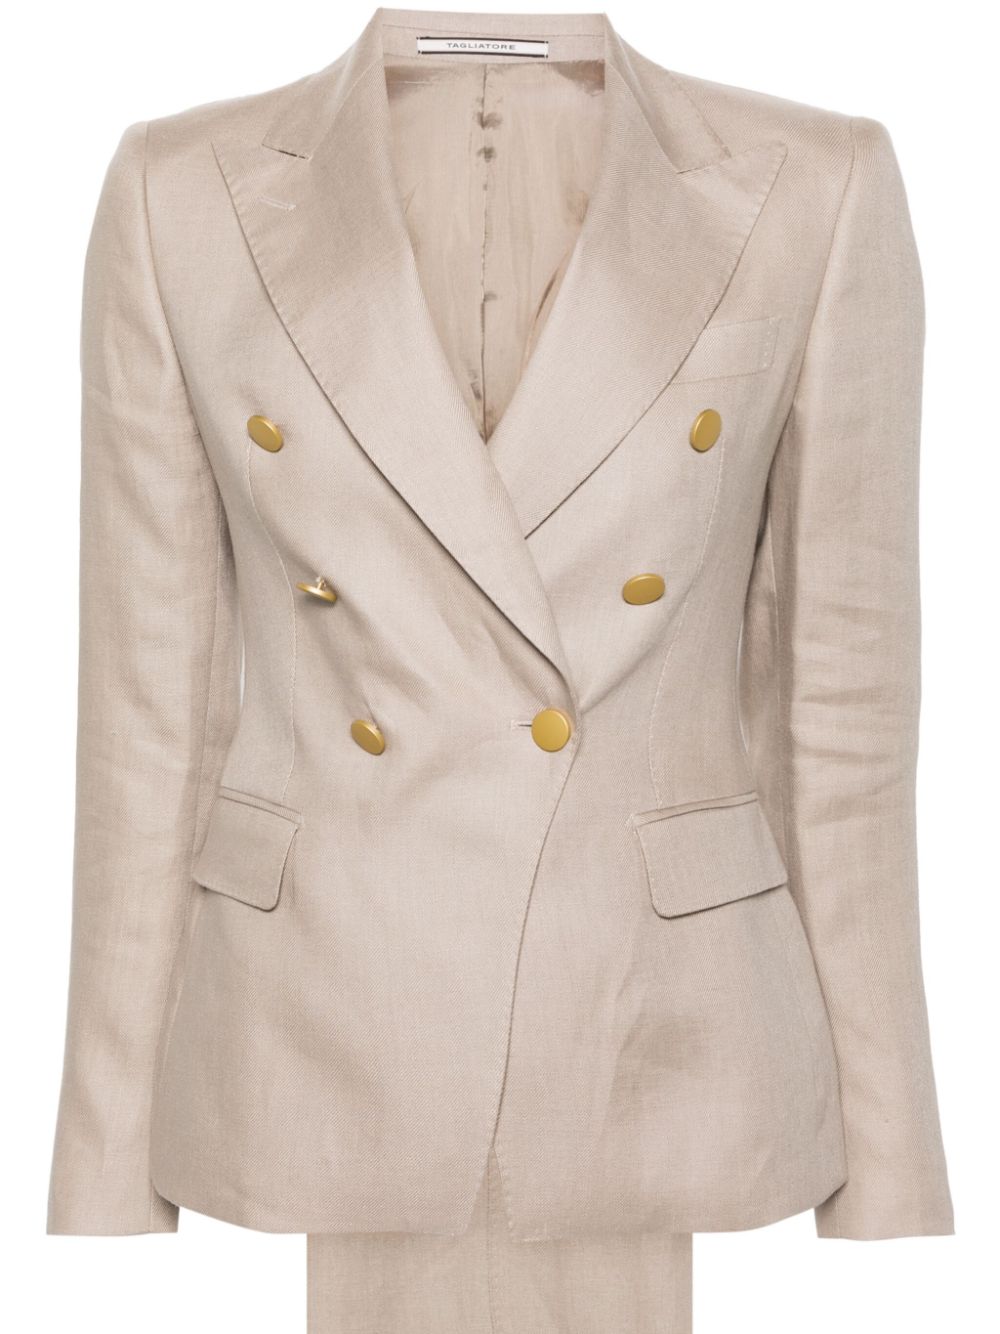 Image 1 of Tagliatore double-breasted linen suit